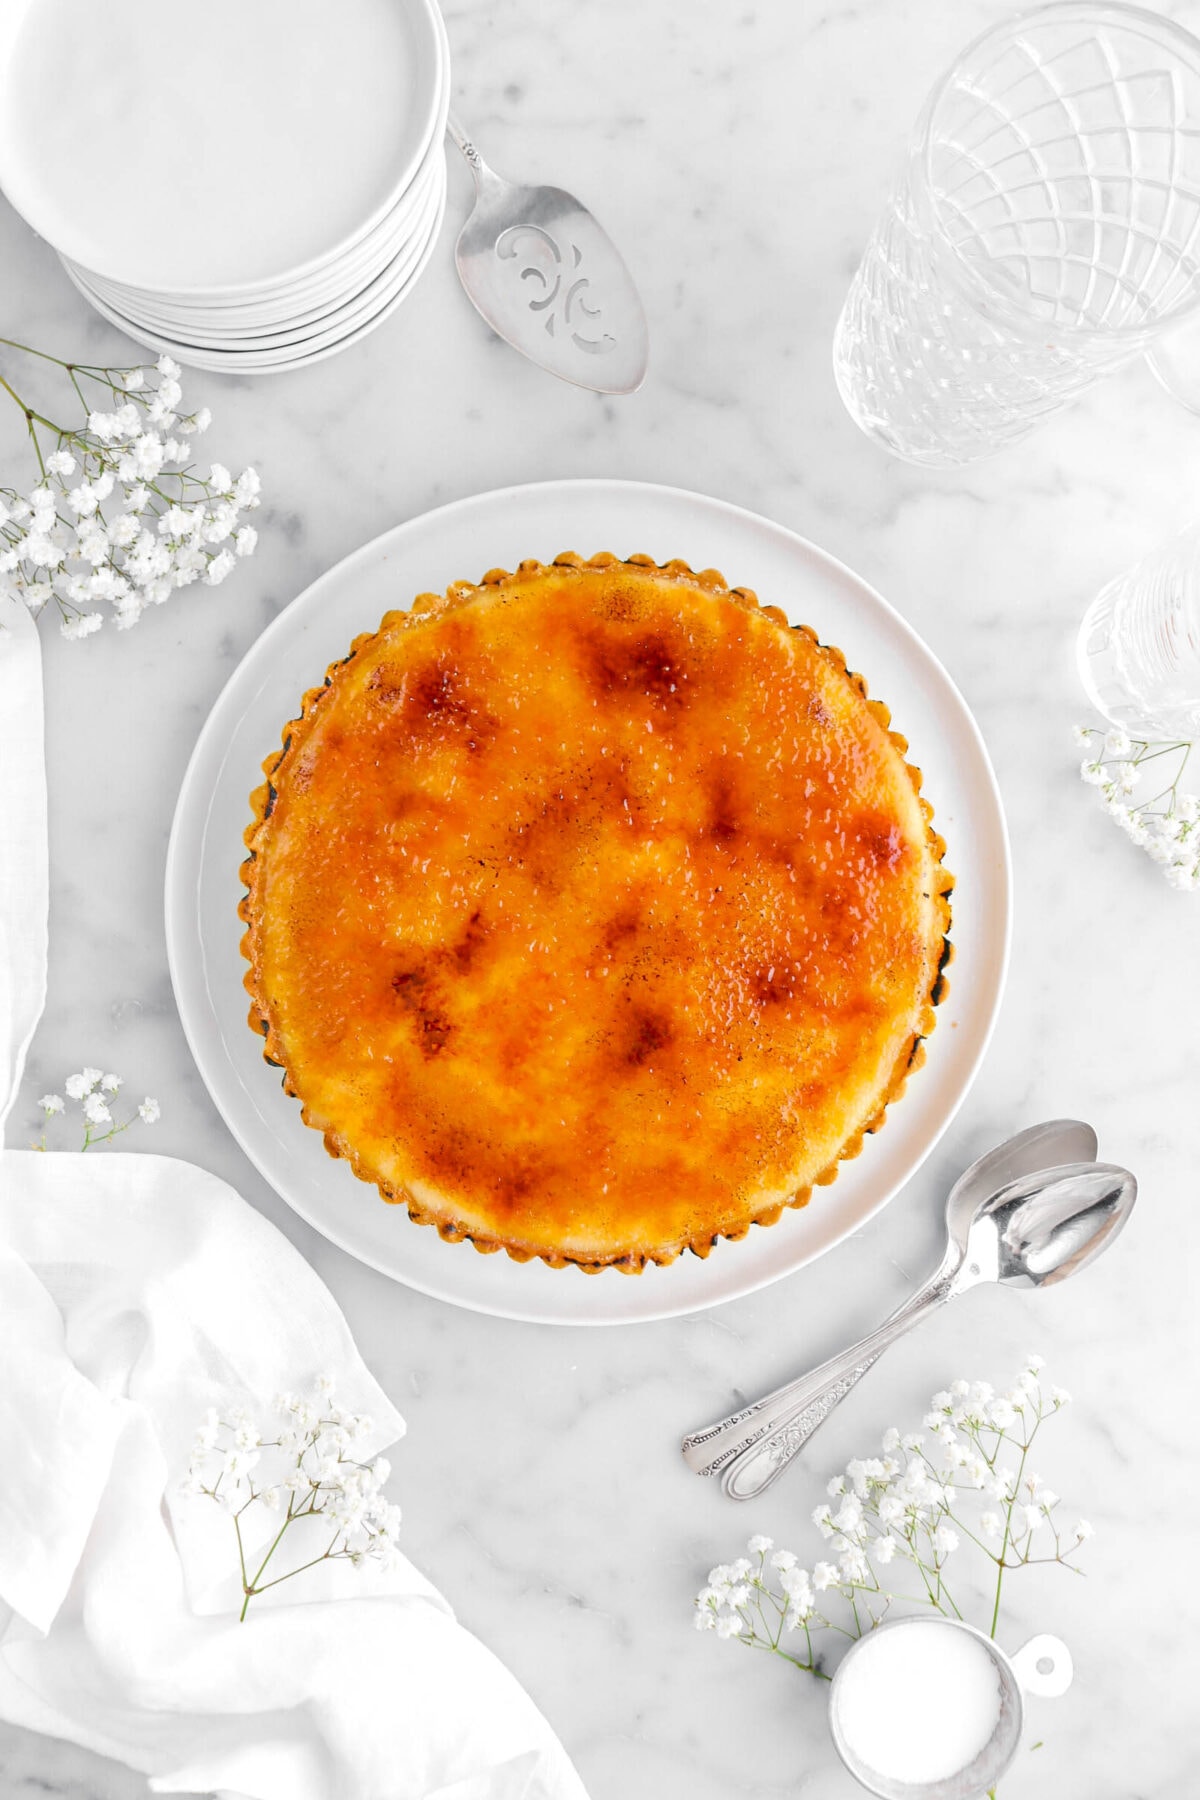 creme brulee tart on white plate with flowers around, two spoons beside, with stack of plates and empty glass.